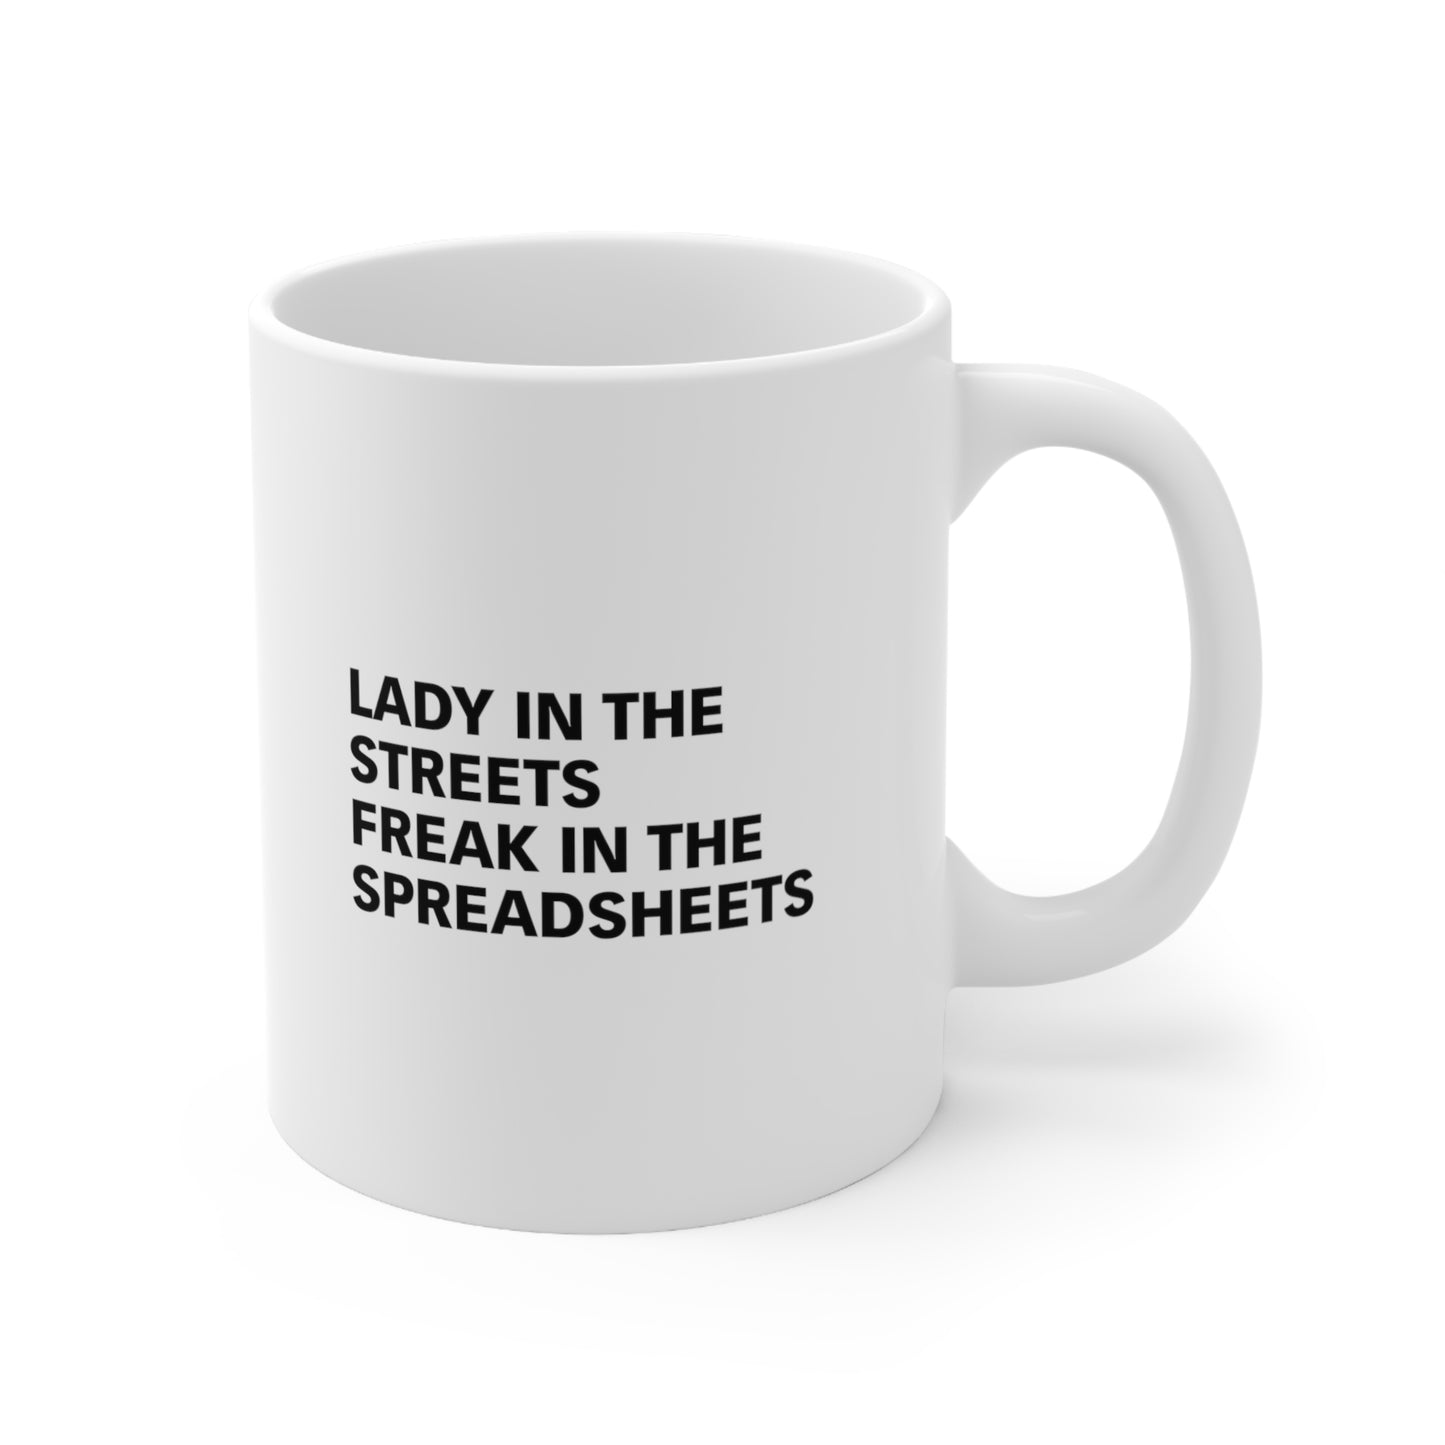 Lady In The Streets Freak In The Spreadsheets Coffee Mug 11oz